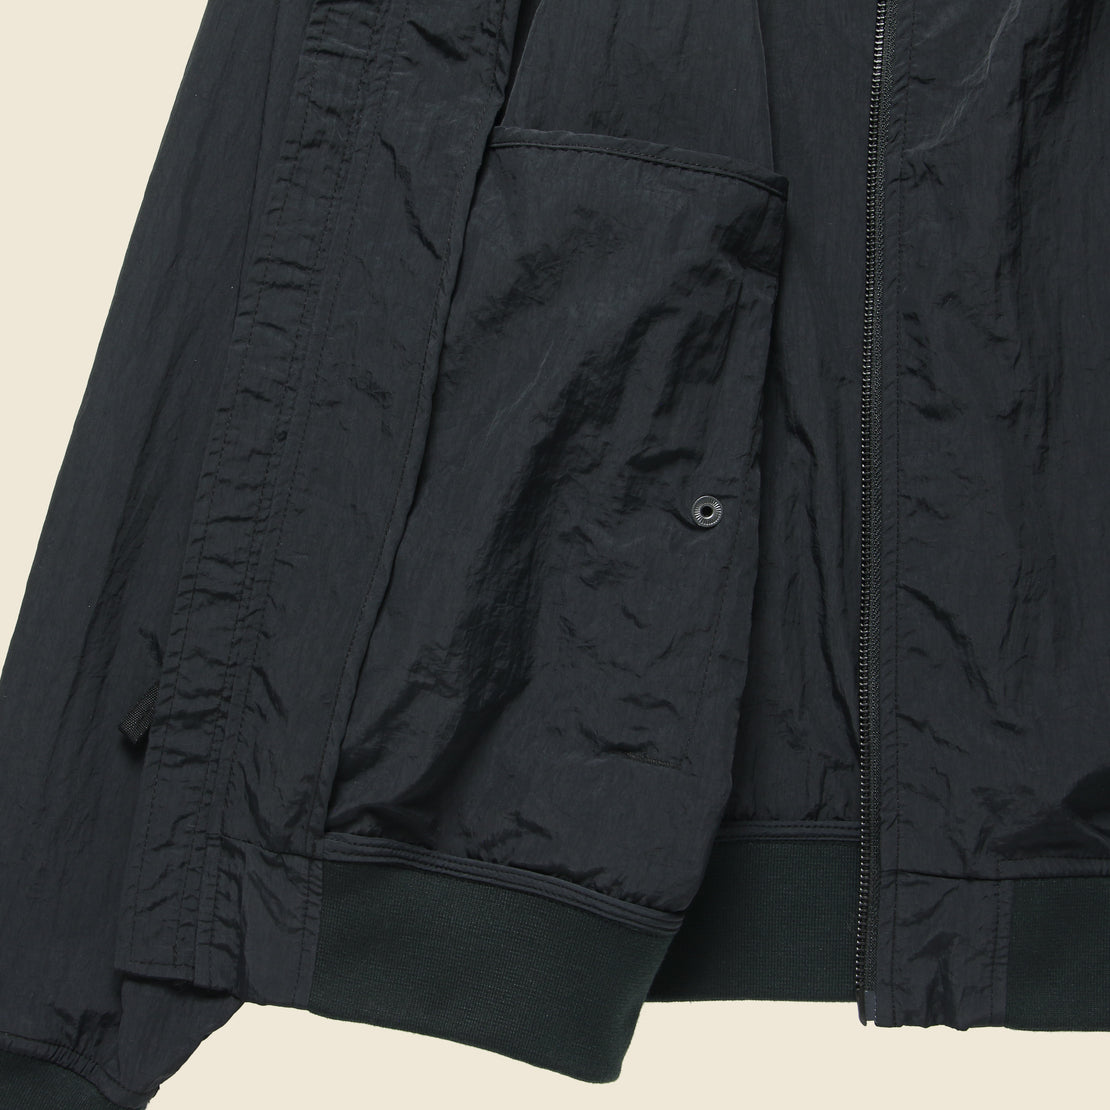 Okenfield Jacket - Black - Penfield - STAG Provisions - Outerwear - Coat / Jacket